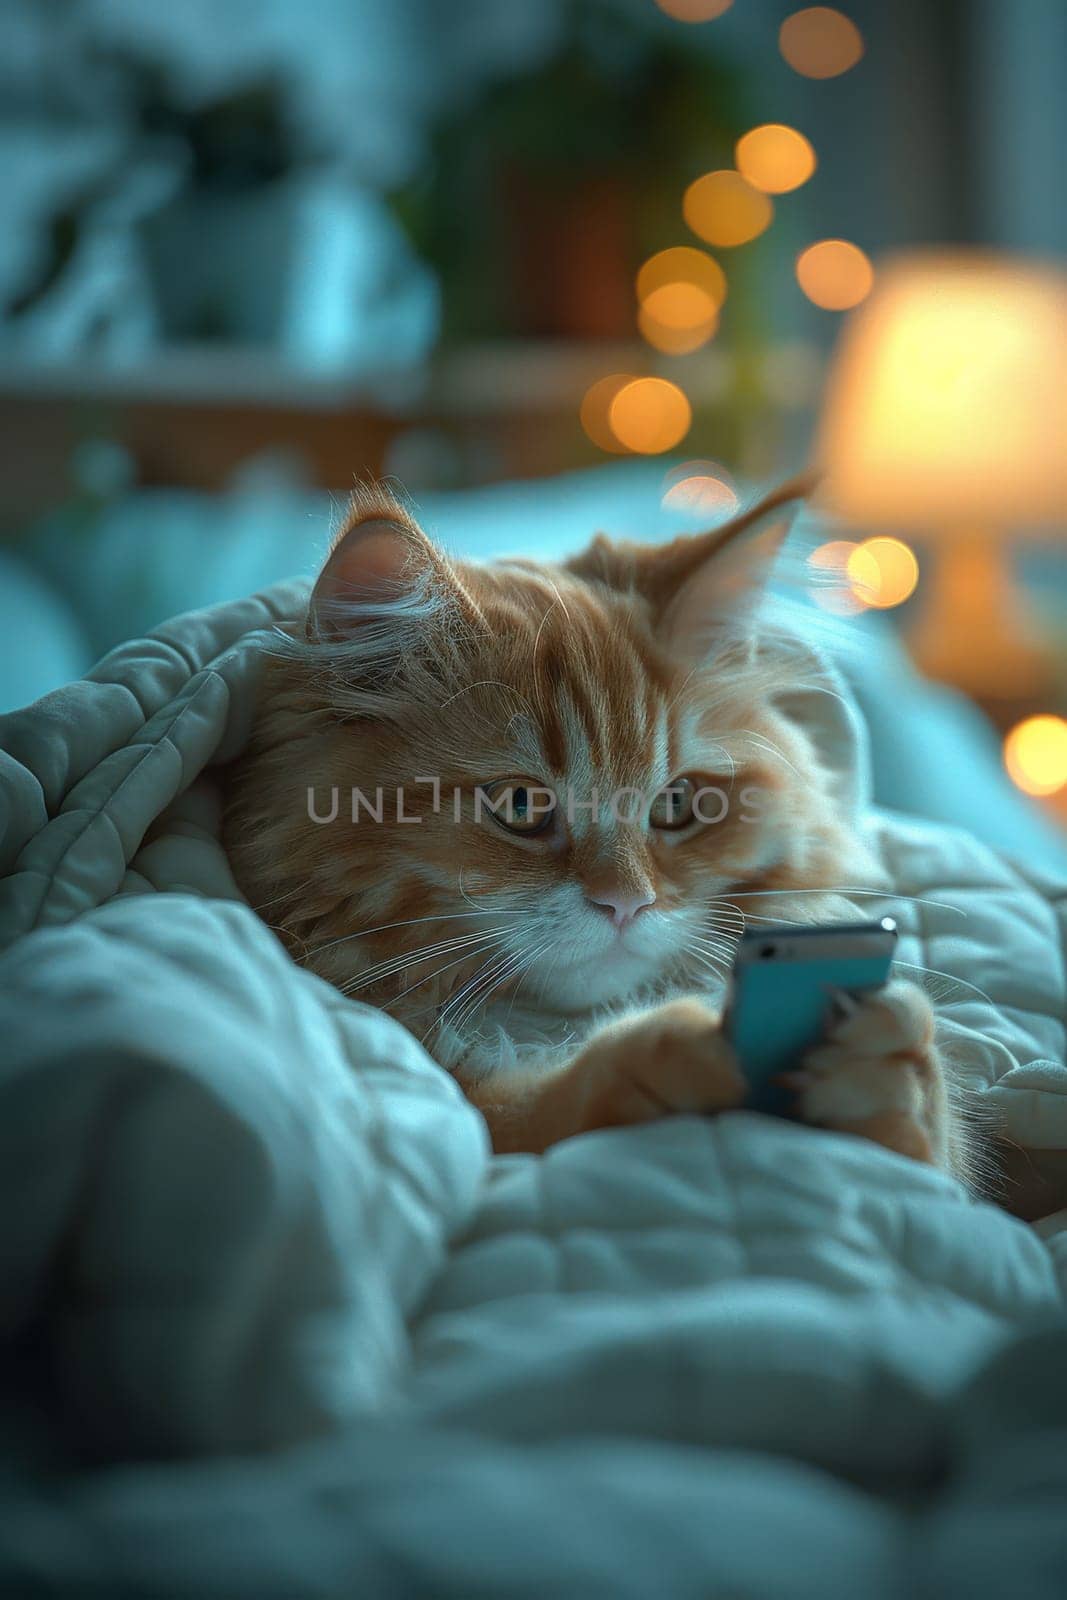 A cat is laying on a bed and looking at a cell phone. The cat appears to be curious about the phone and is possibly trying to figure out what it is. The scene has a playful and lighthearted mood